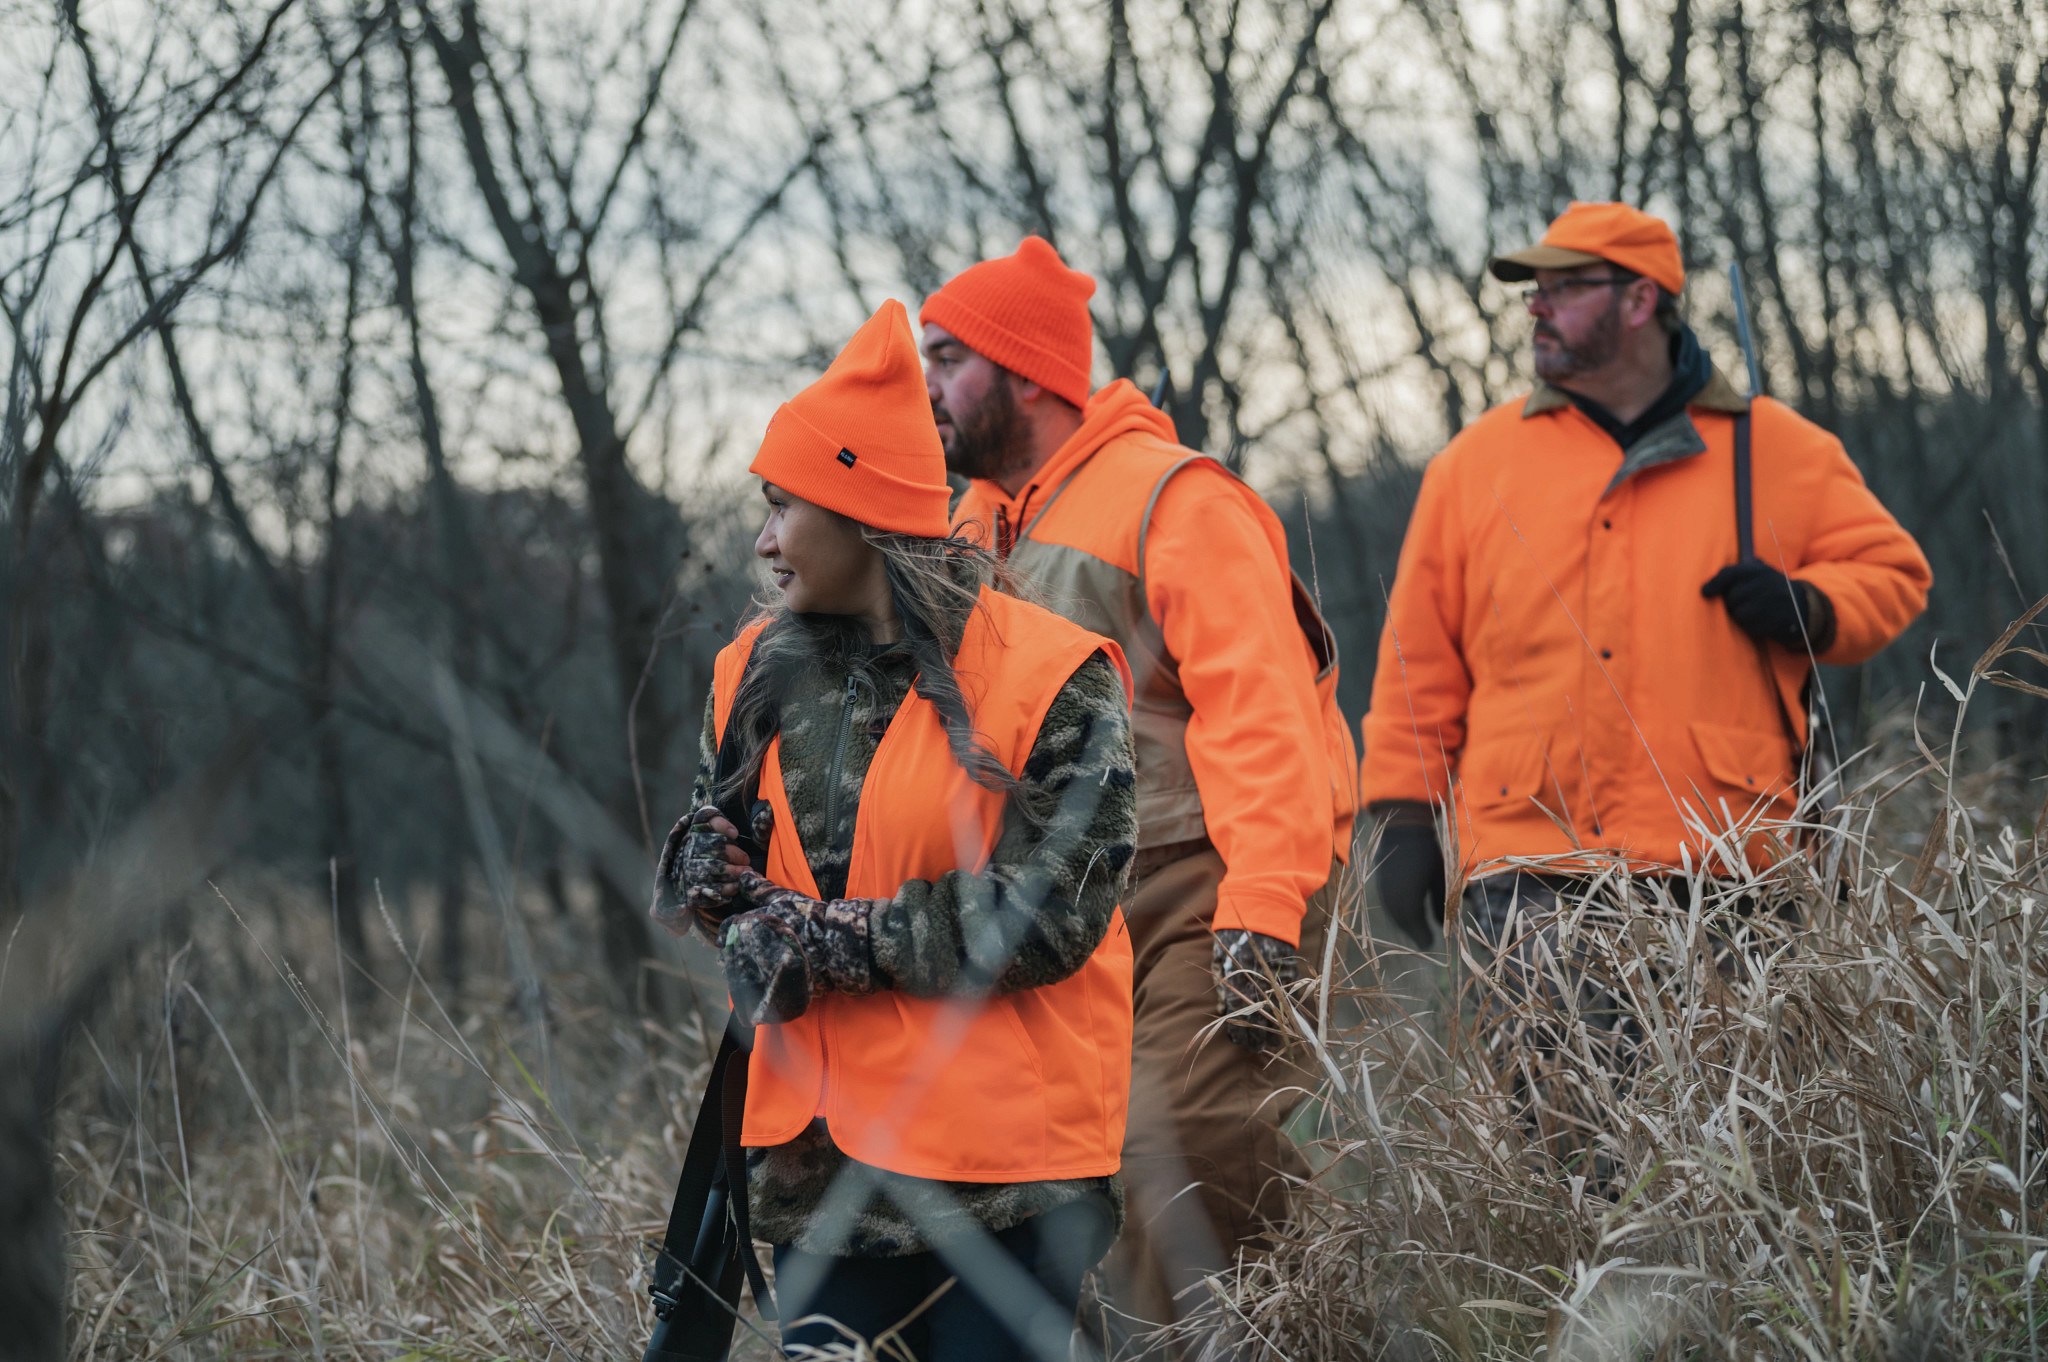 Three deer hunters walk through a field of tall grass safely shouldering their firearms and wearing blaze orange.